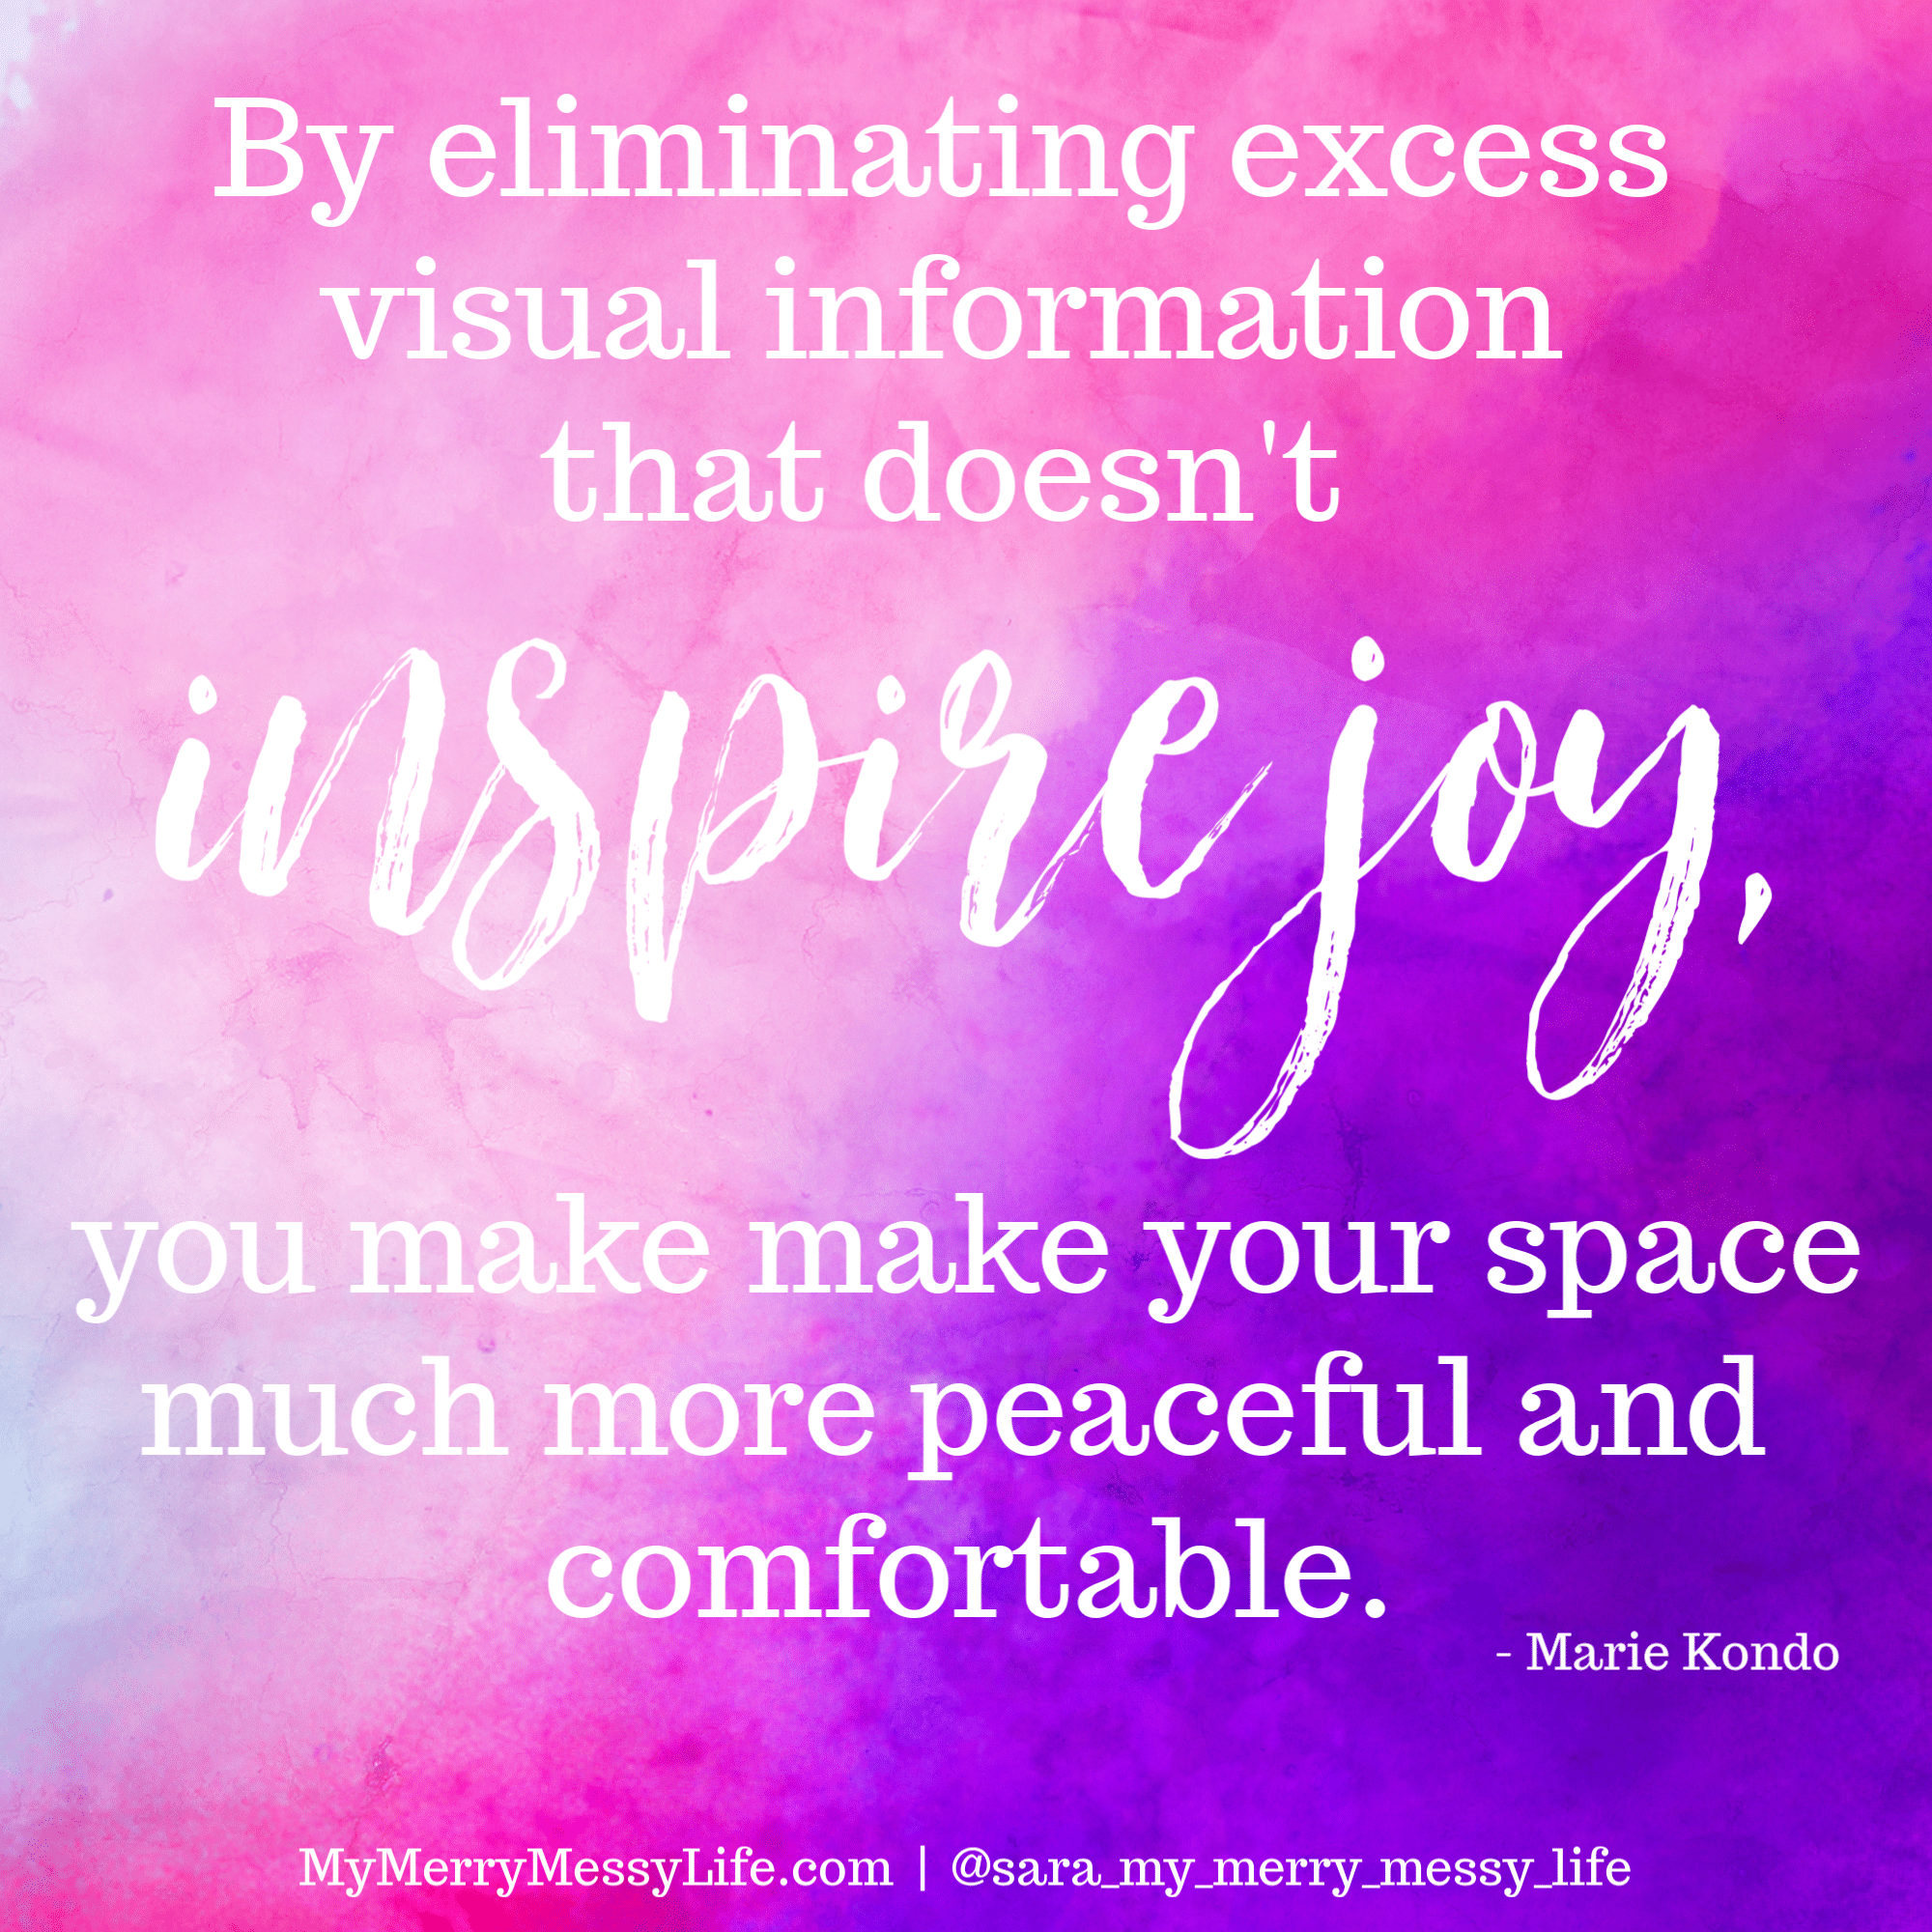 By eliminating excess visual information that doesn't inspire joy, you make your space much more peaceful and comfortable. - Marie Kondo of the KonMarie method